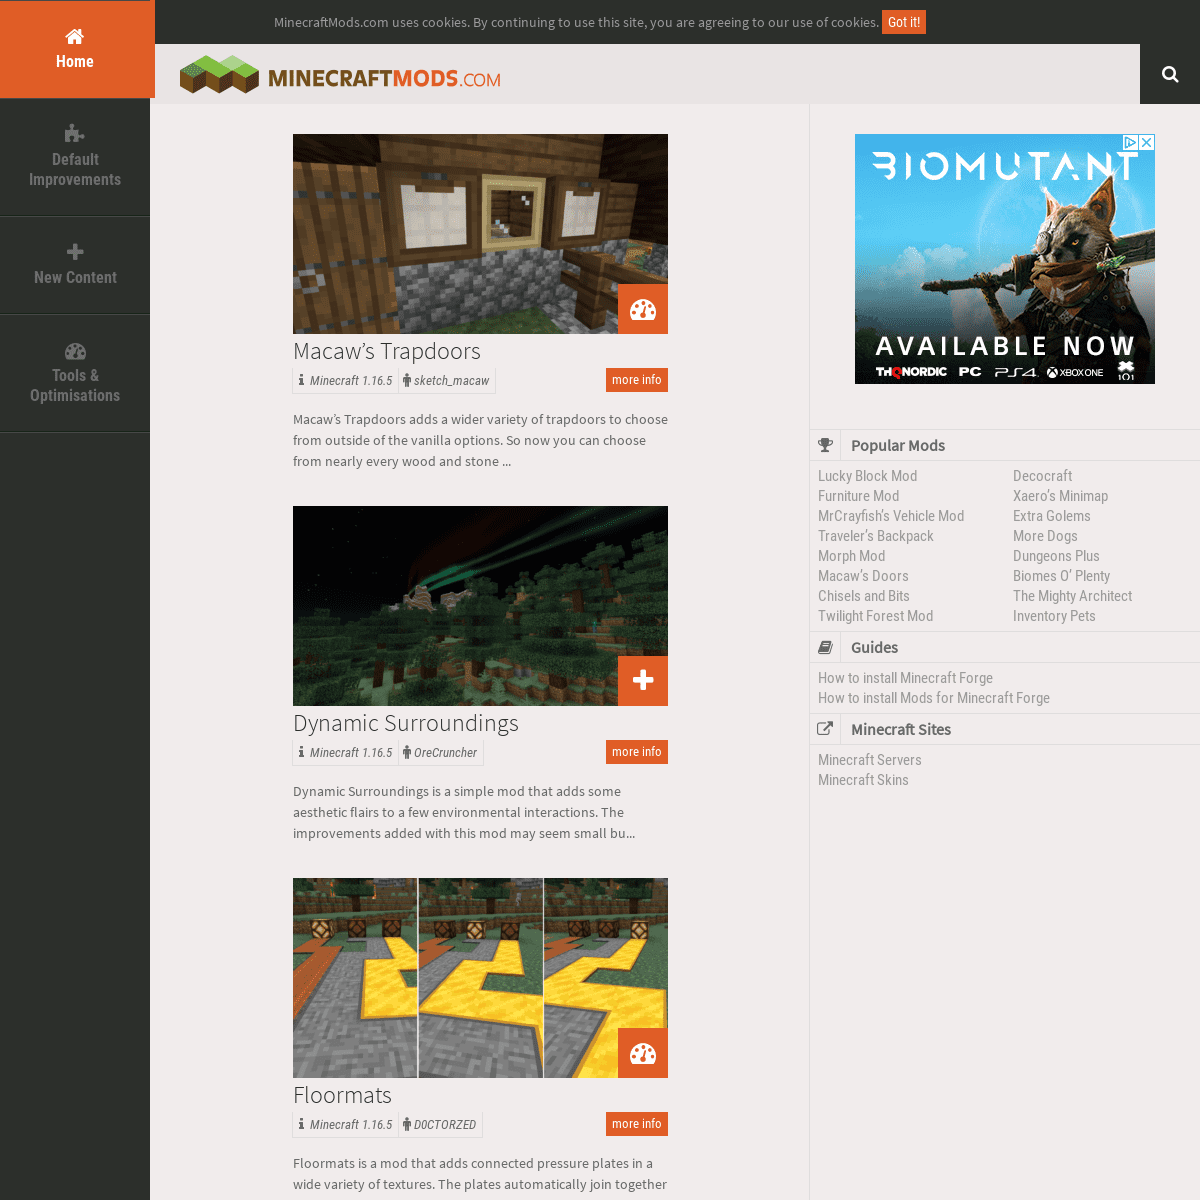 A complete backup of https://minecraftmods.com